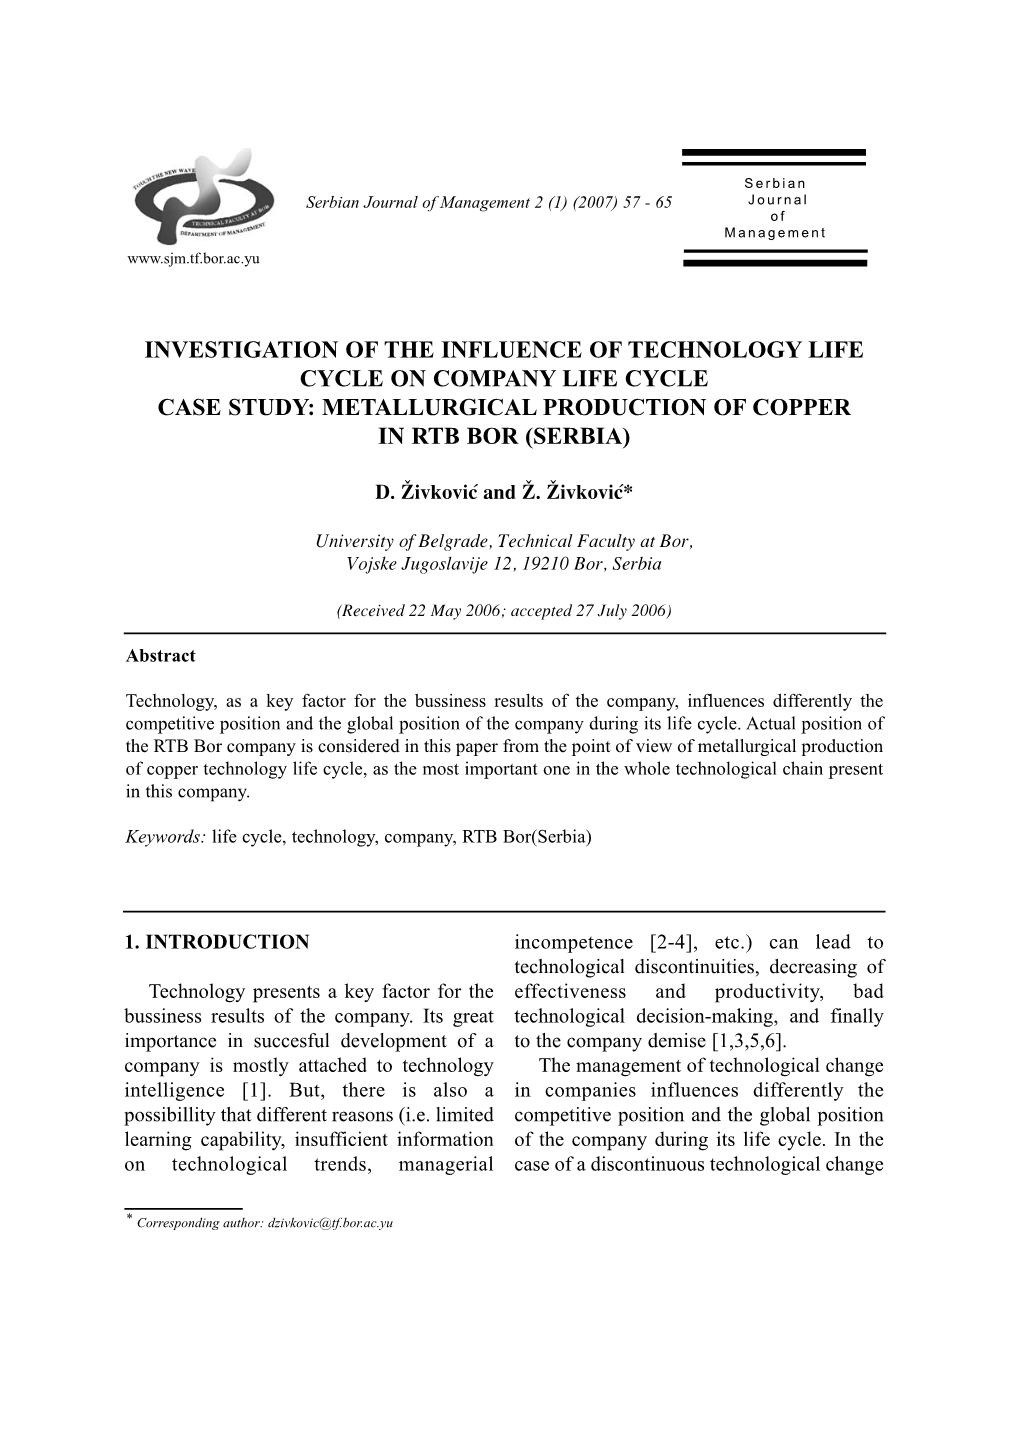 Investigation of the Influence of Technology Life Cycle on Company Life Cycle Case Study: Metallurgical Production of Copper in Rtb Bor (Serbia)